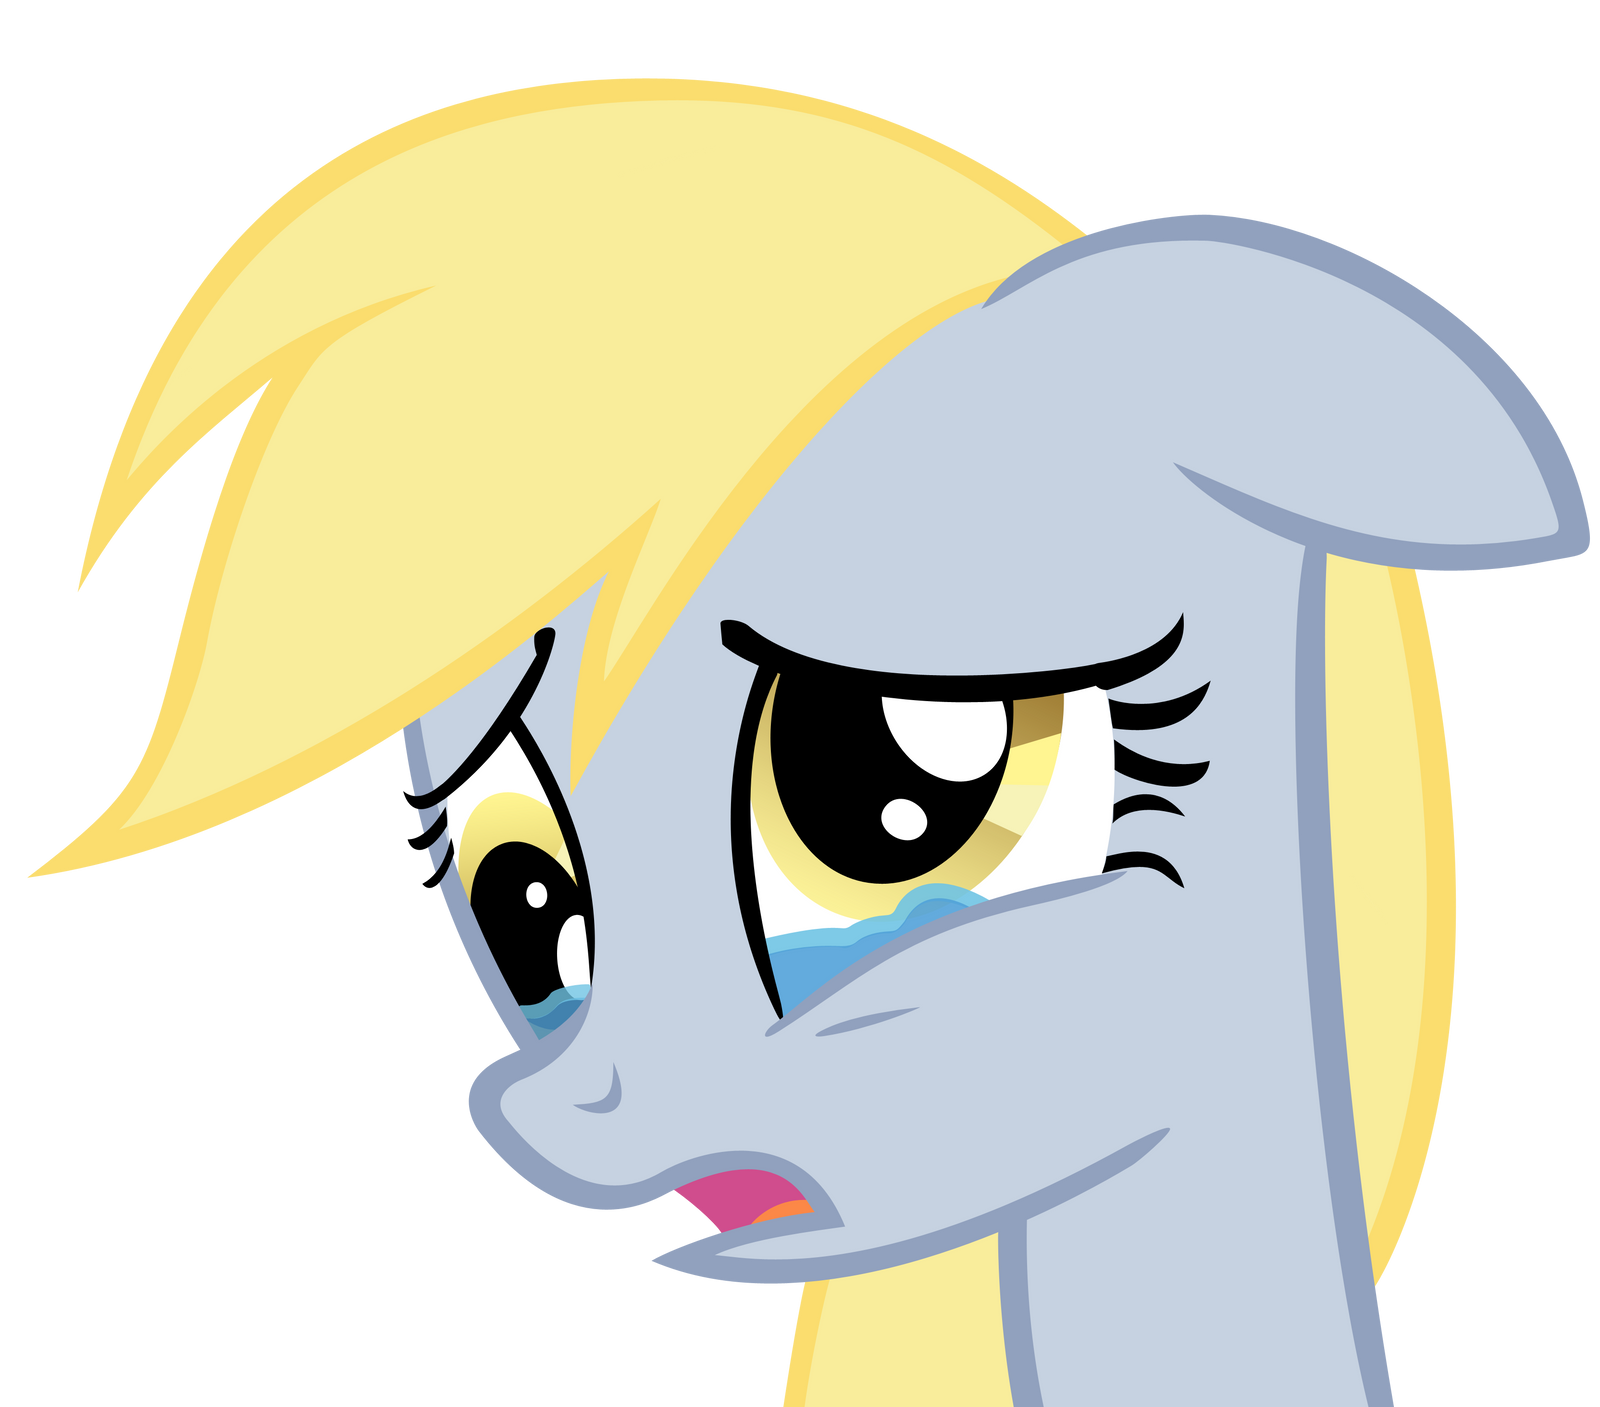 sad_derpy_by_anitech-d4f0ad8.png.